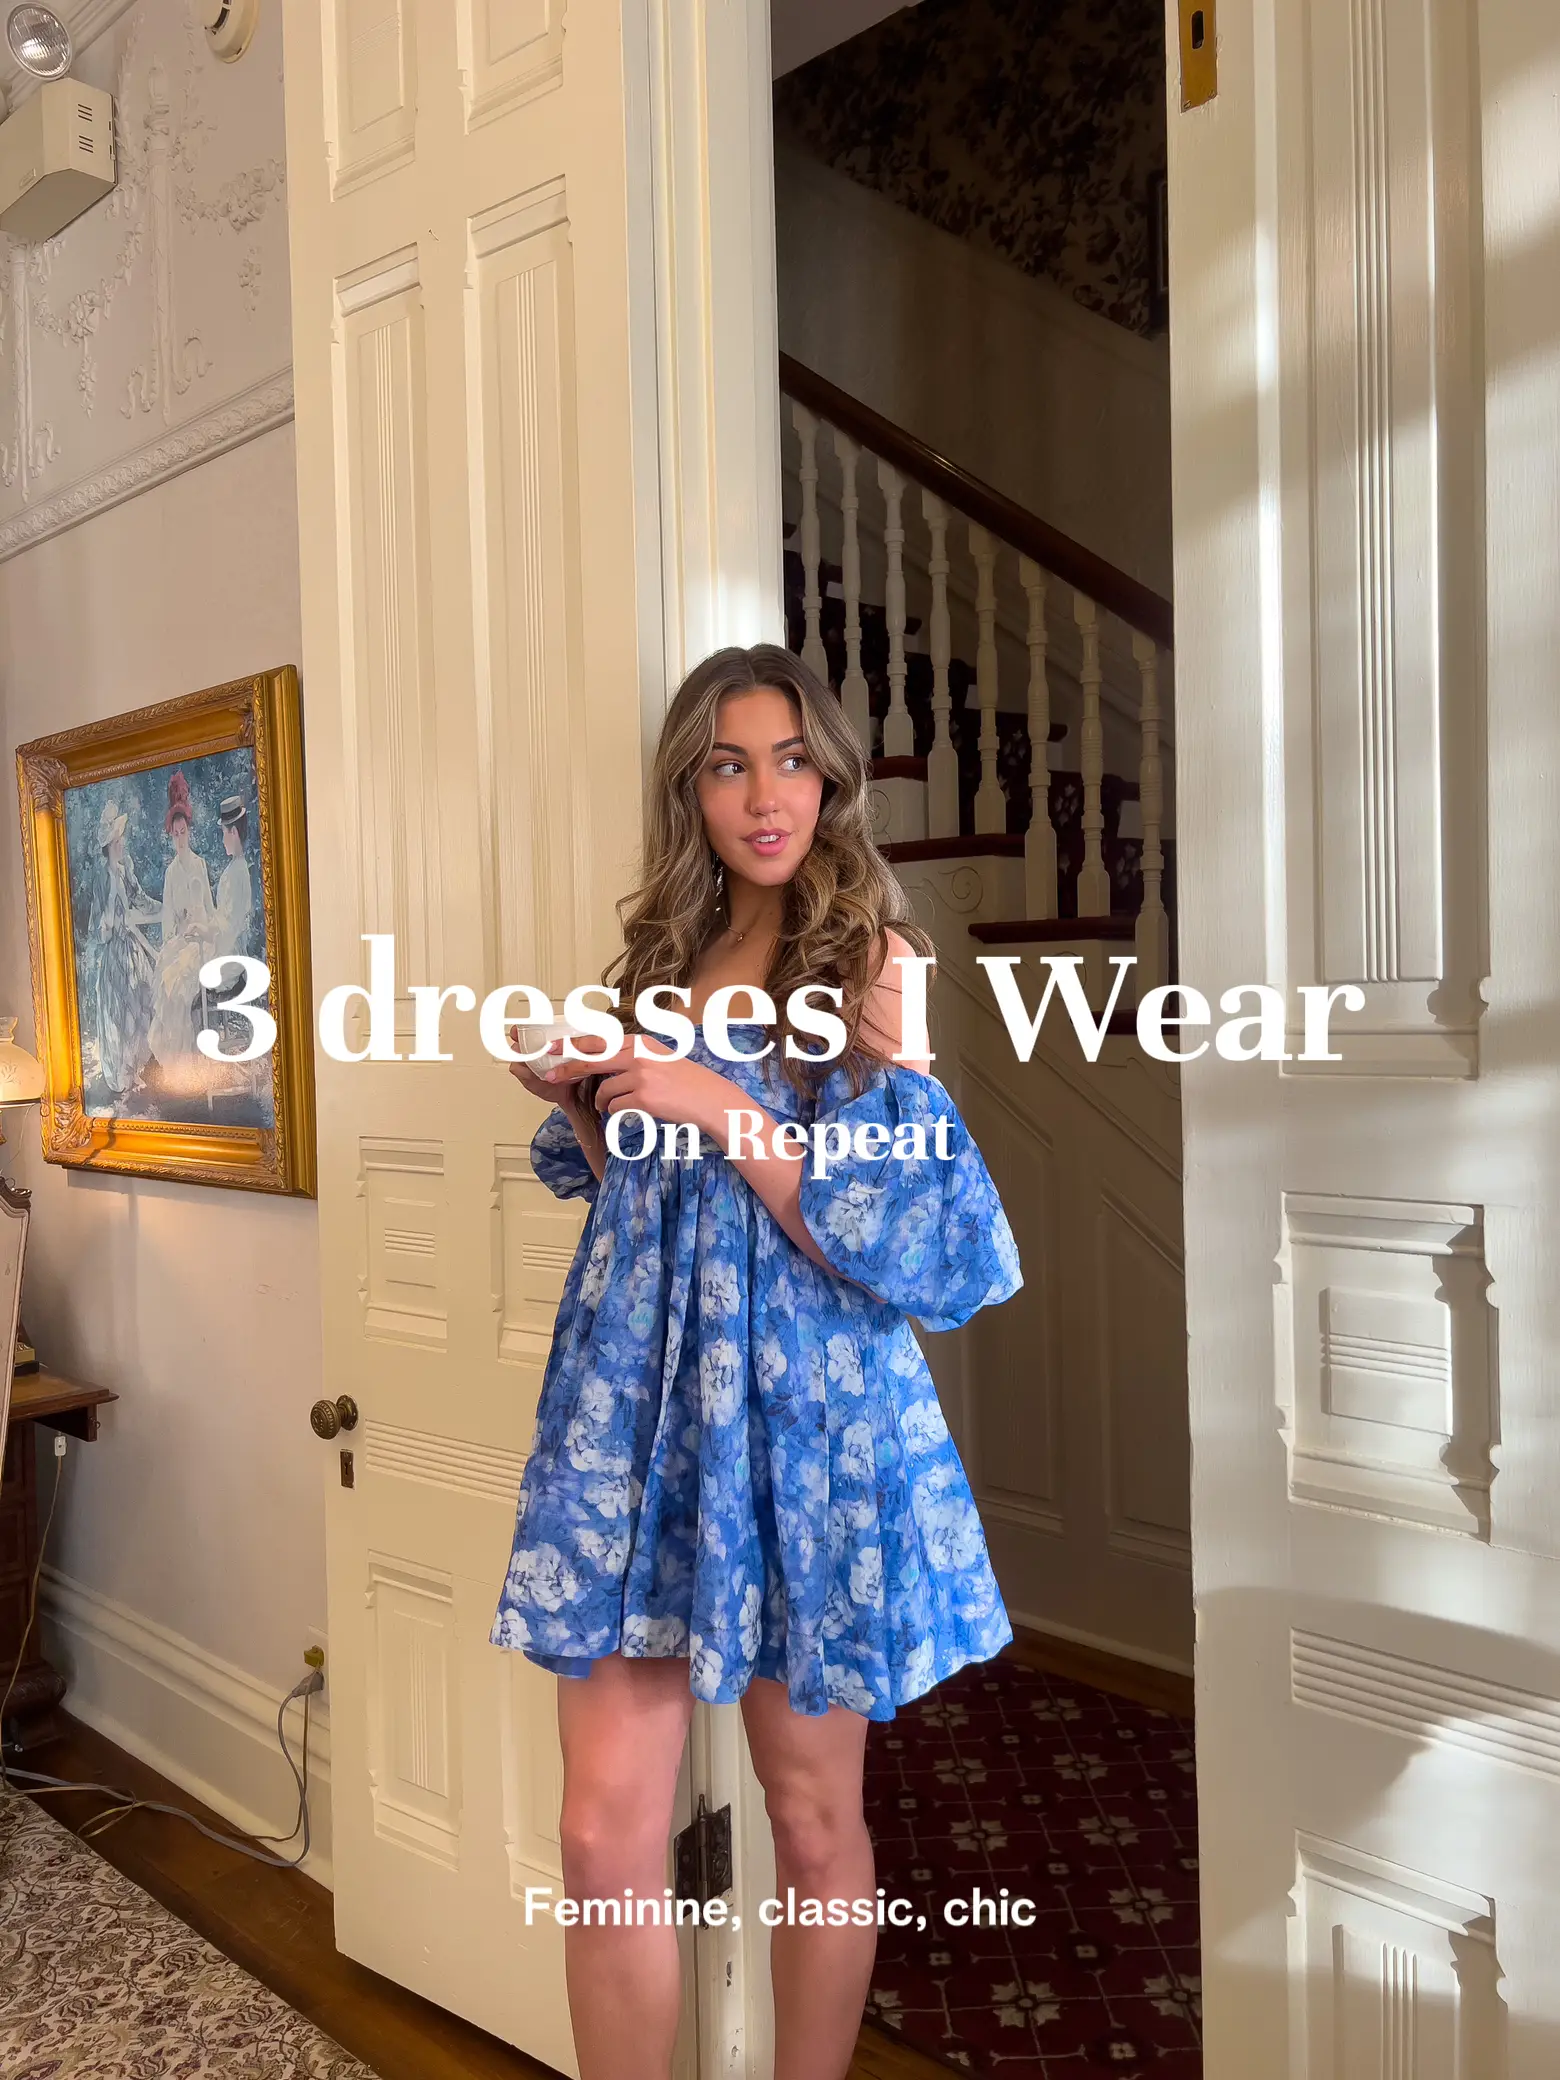 How do you style your Everyday Dress during the fall? 🍂 If you need some  cute inspiration, check out this video featuring several ways on how to  wear your halara dress this